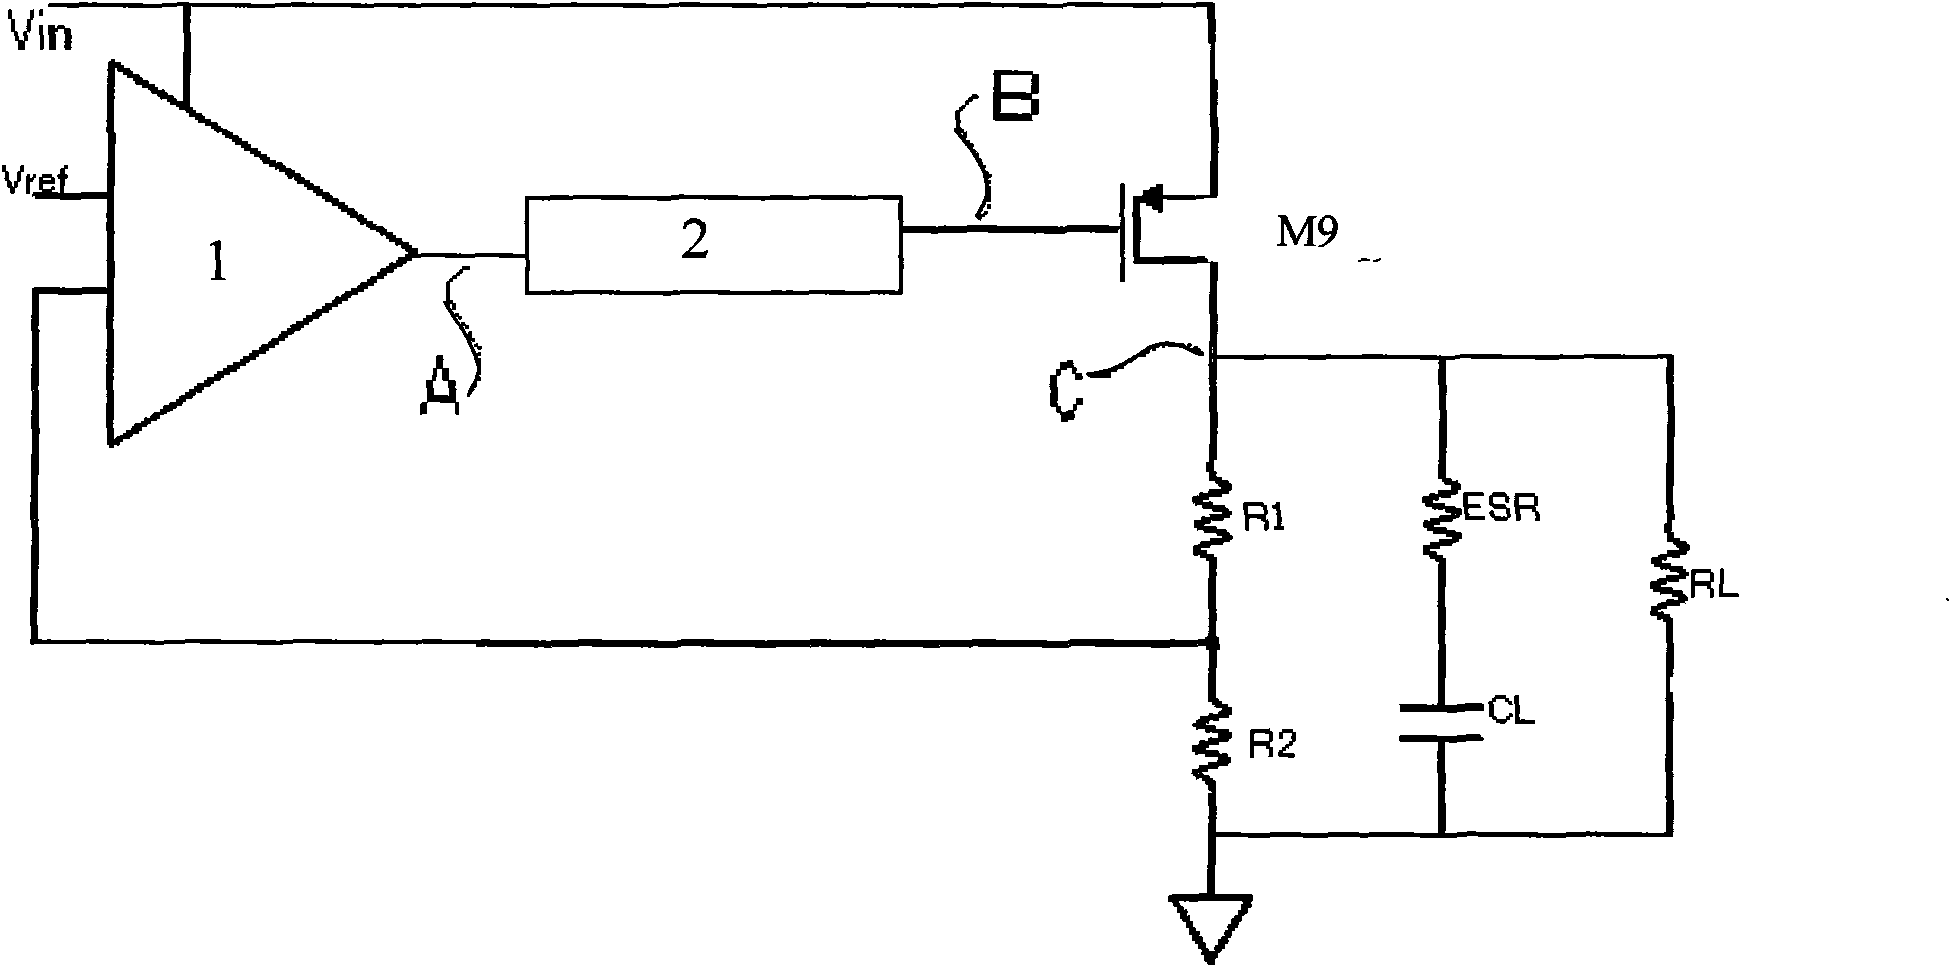 Self-adaption zero-frequency compensation circuit in low-voltage difference linear voltage regulator